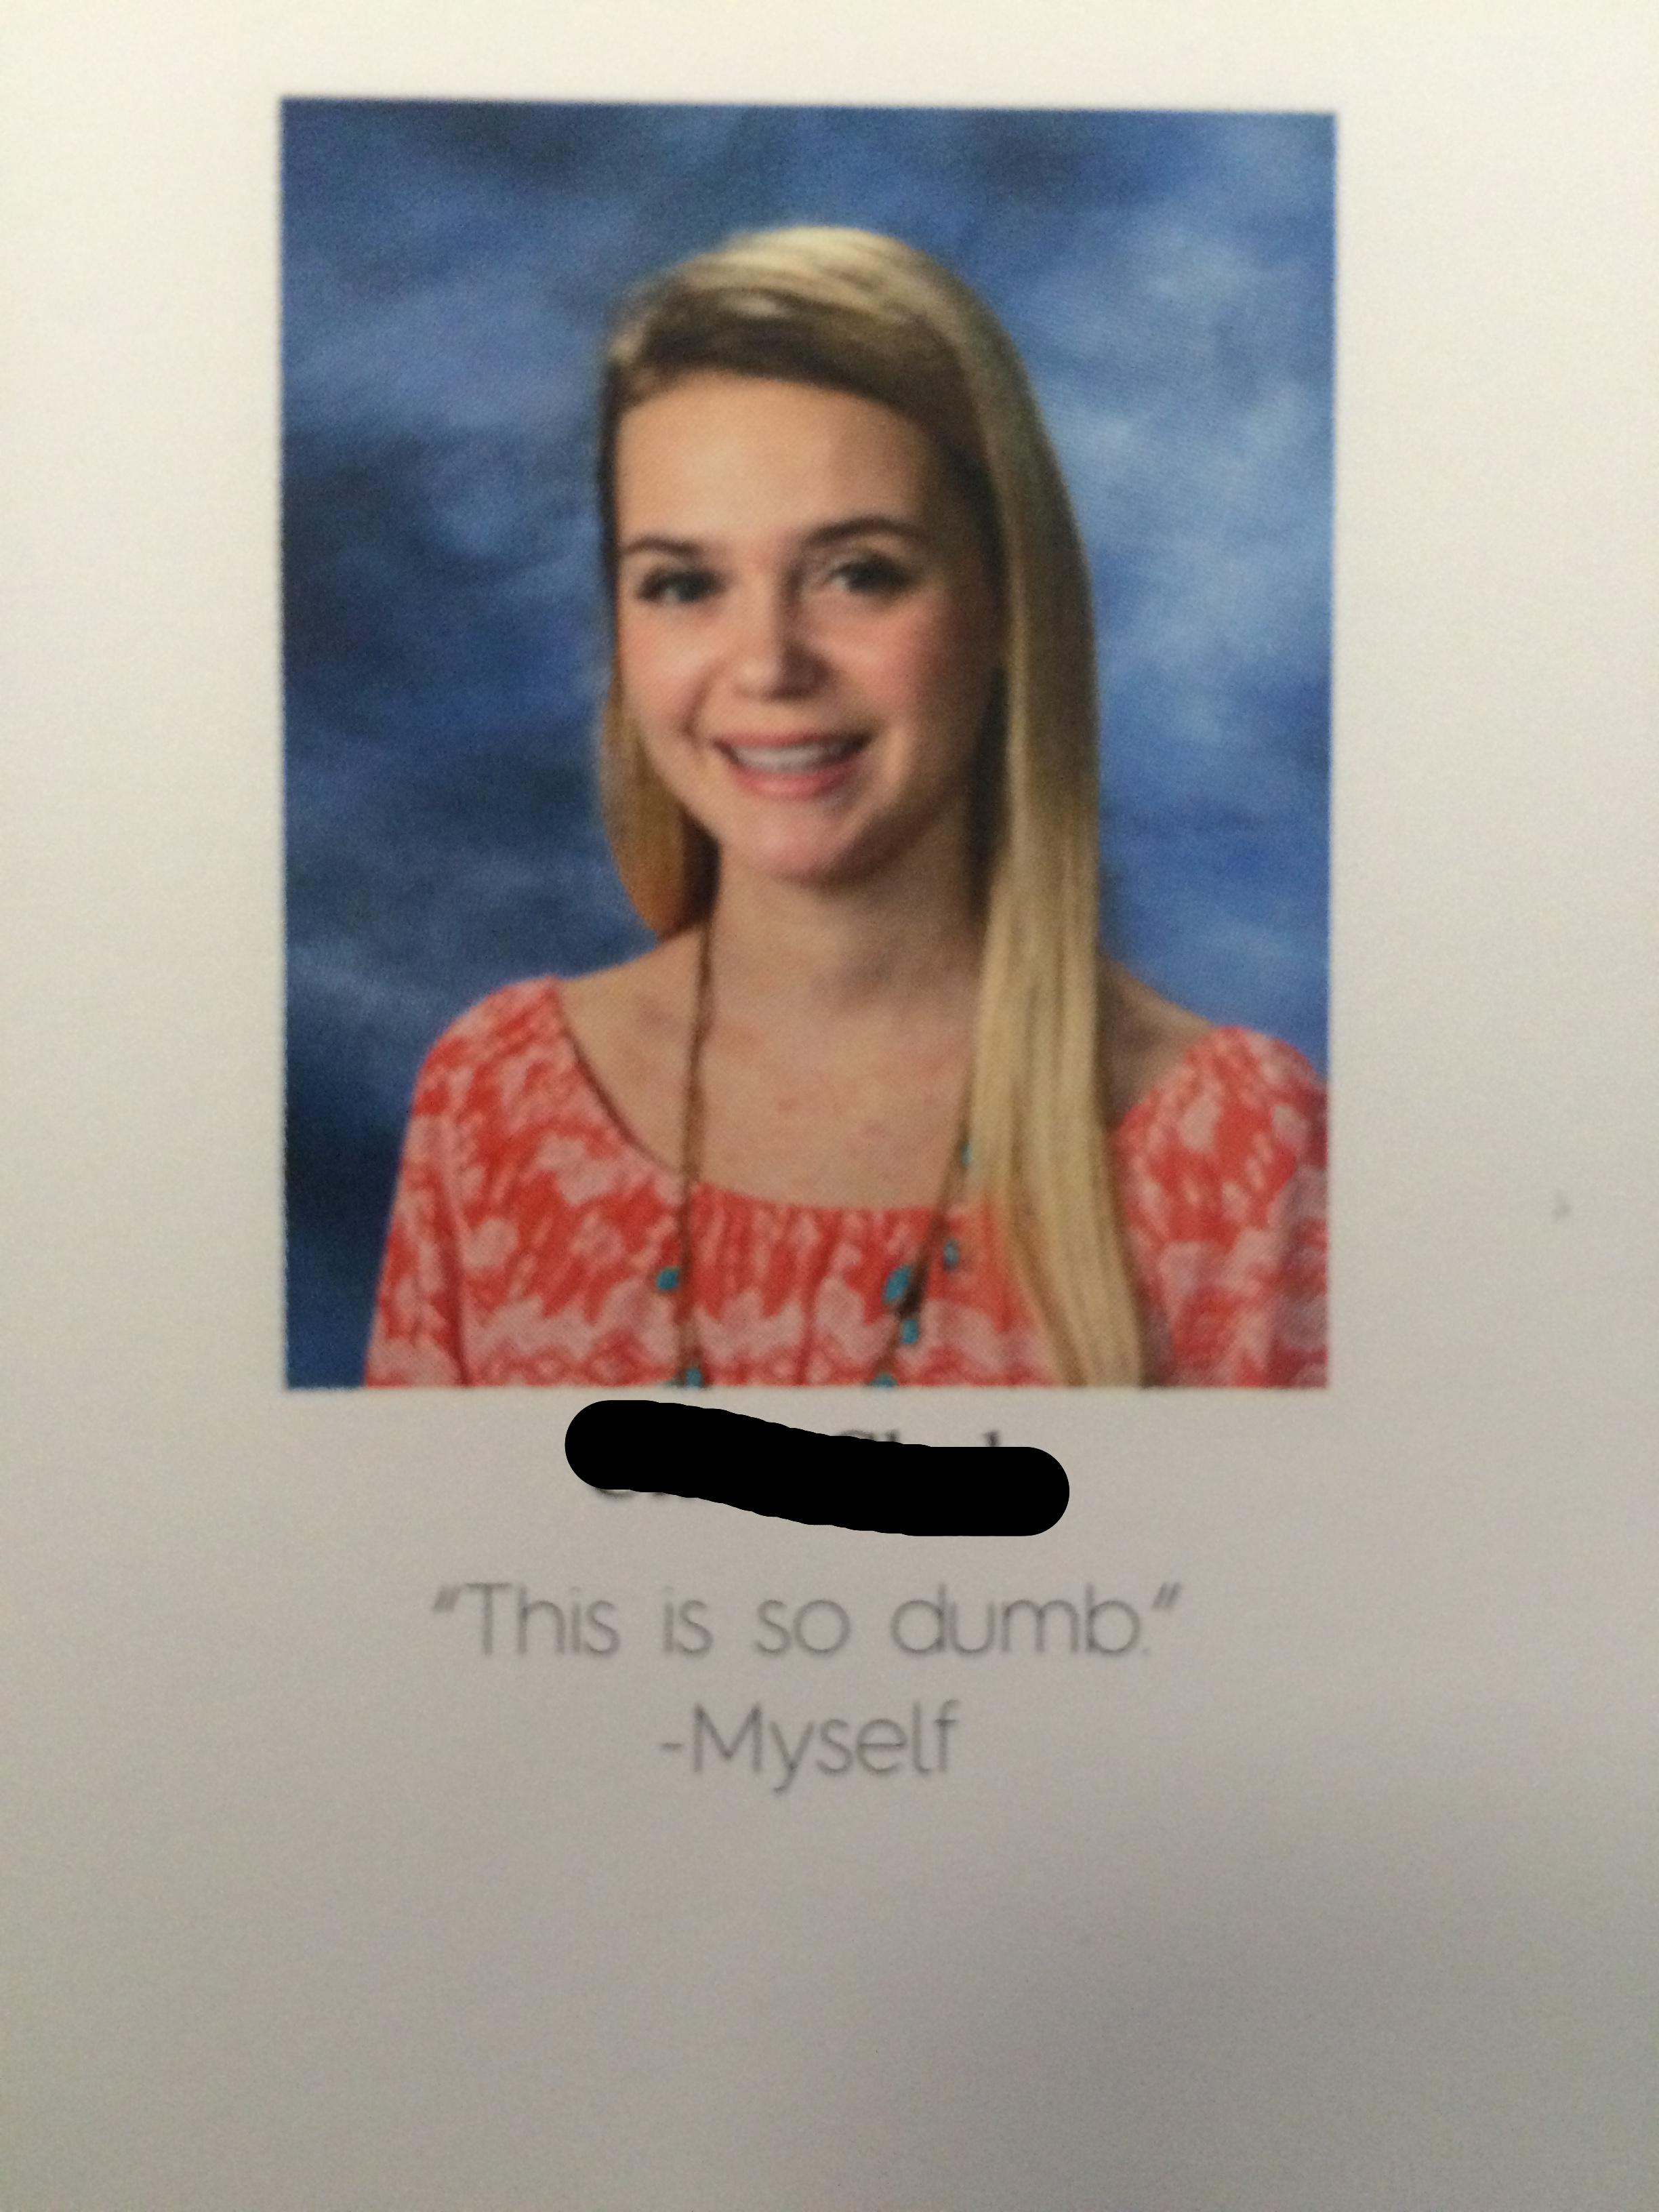 19 Ridiculous Yearbook Quotes